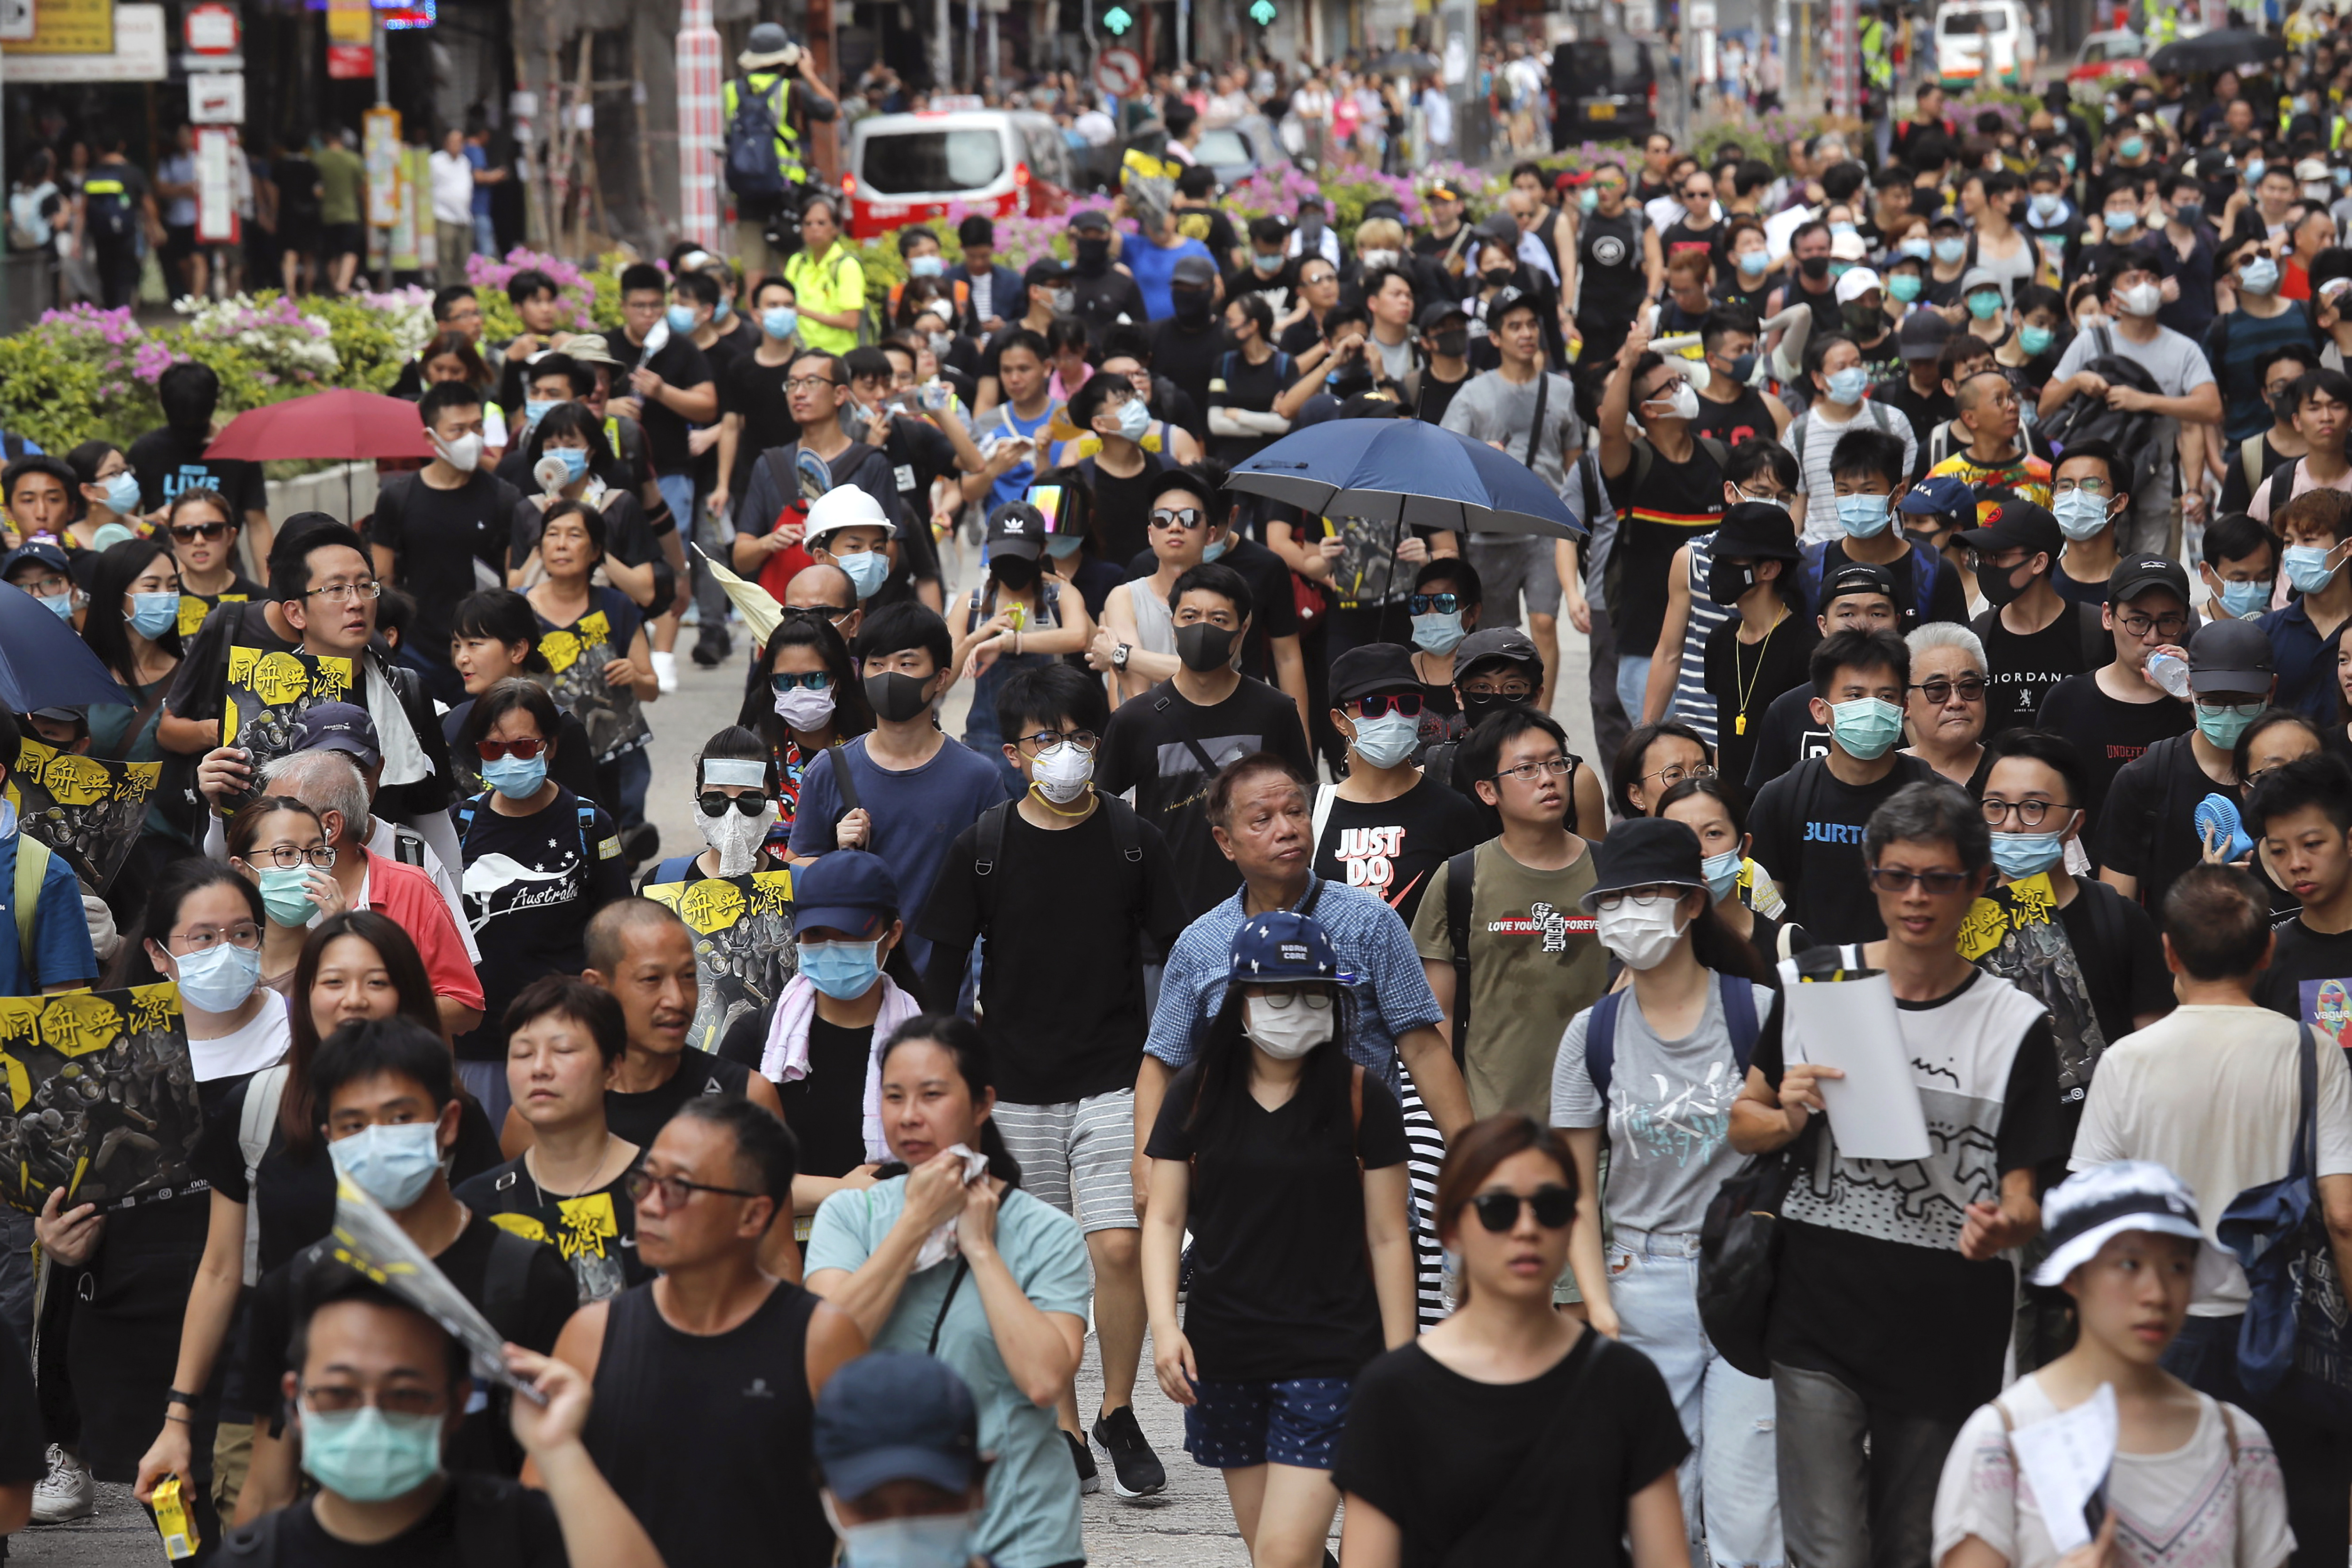 Protesters and residents take part in the anti-extradition bill protest march at Shum Shui Po in Hong Kong, Sunday, Aug. 11, 2019. Separate protests were being held in two parts of Hong Kong on Sunday in a continuing series of demonstrations that have generally started peacefully but often ended in violent clashes with police. (AP Photo/Kin Cheung)